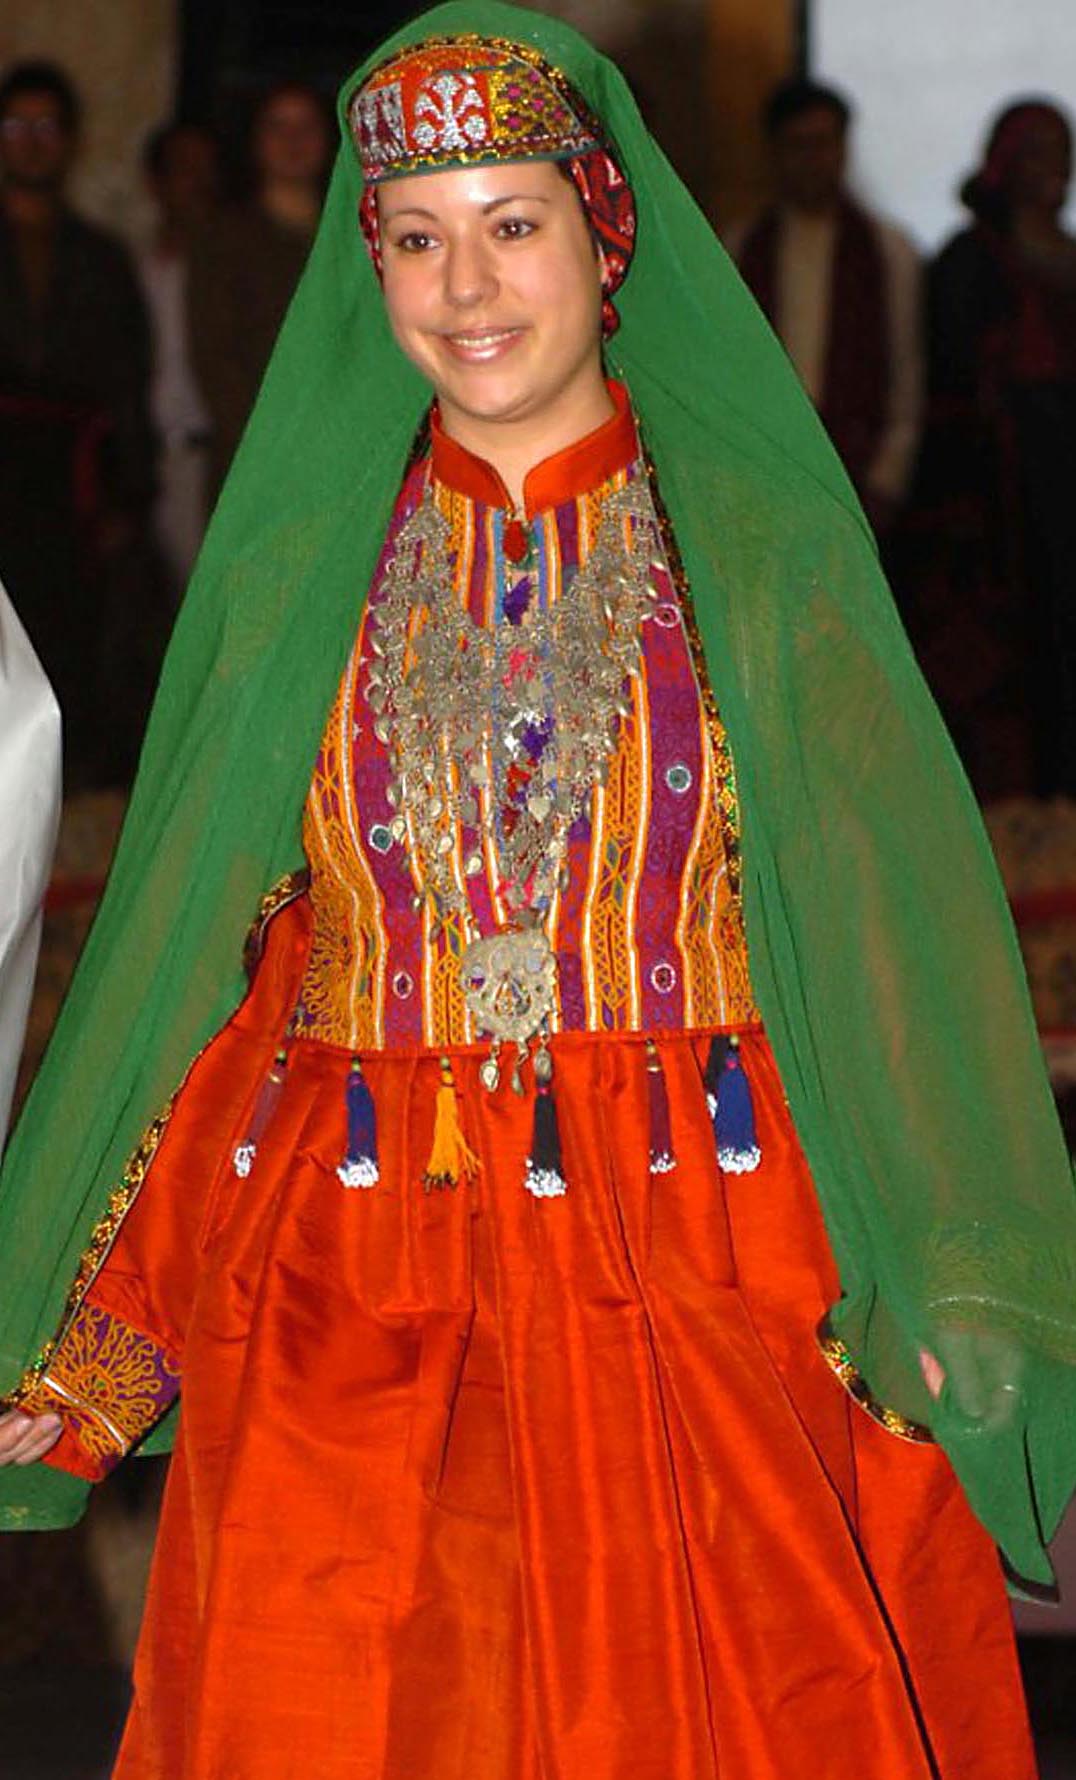 GI_walks_down_the_runway_during_a_fashion_show_dressed_in_a_colorful,_traditional_Afghan_dress._The_March_3,_2008.jpg